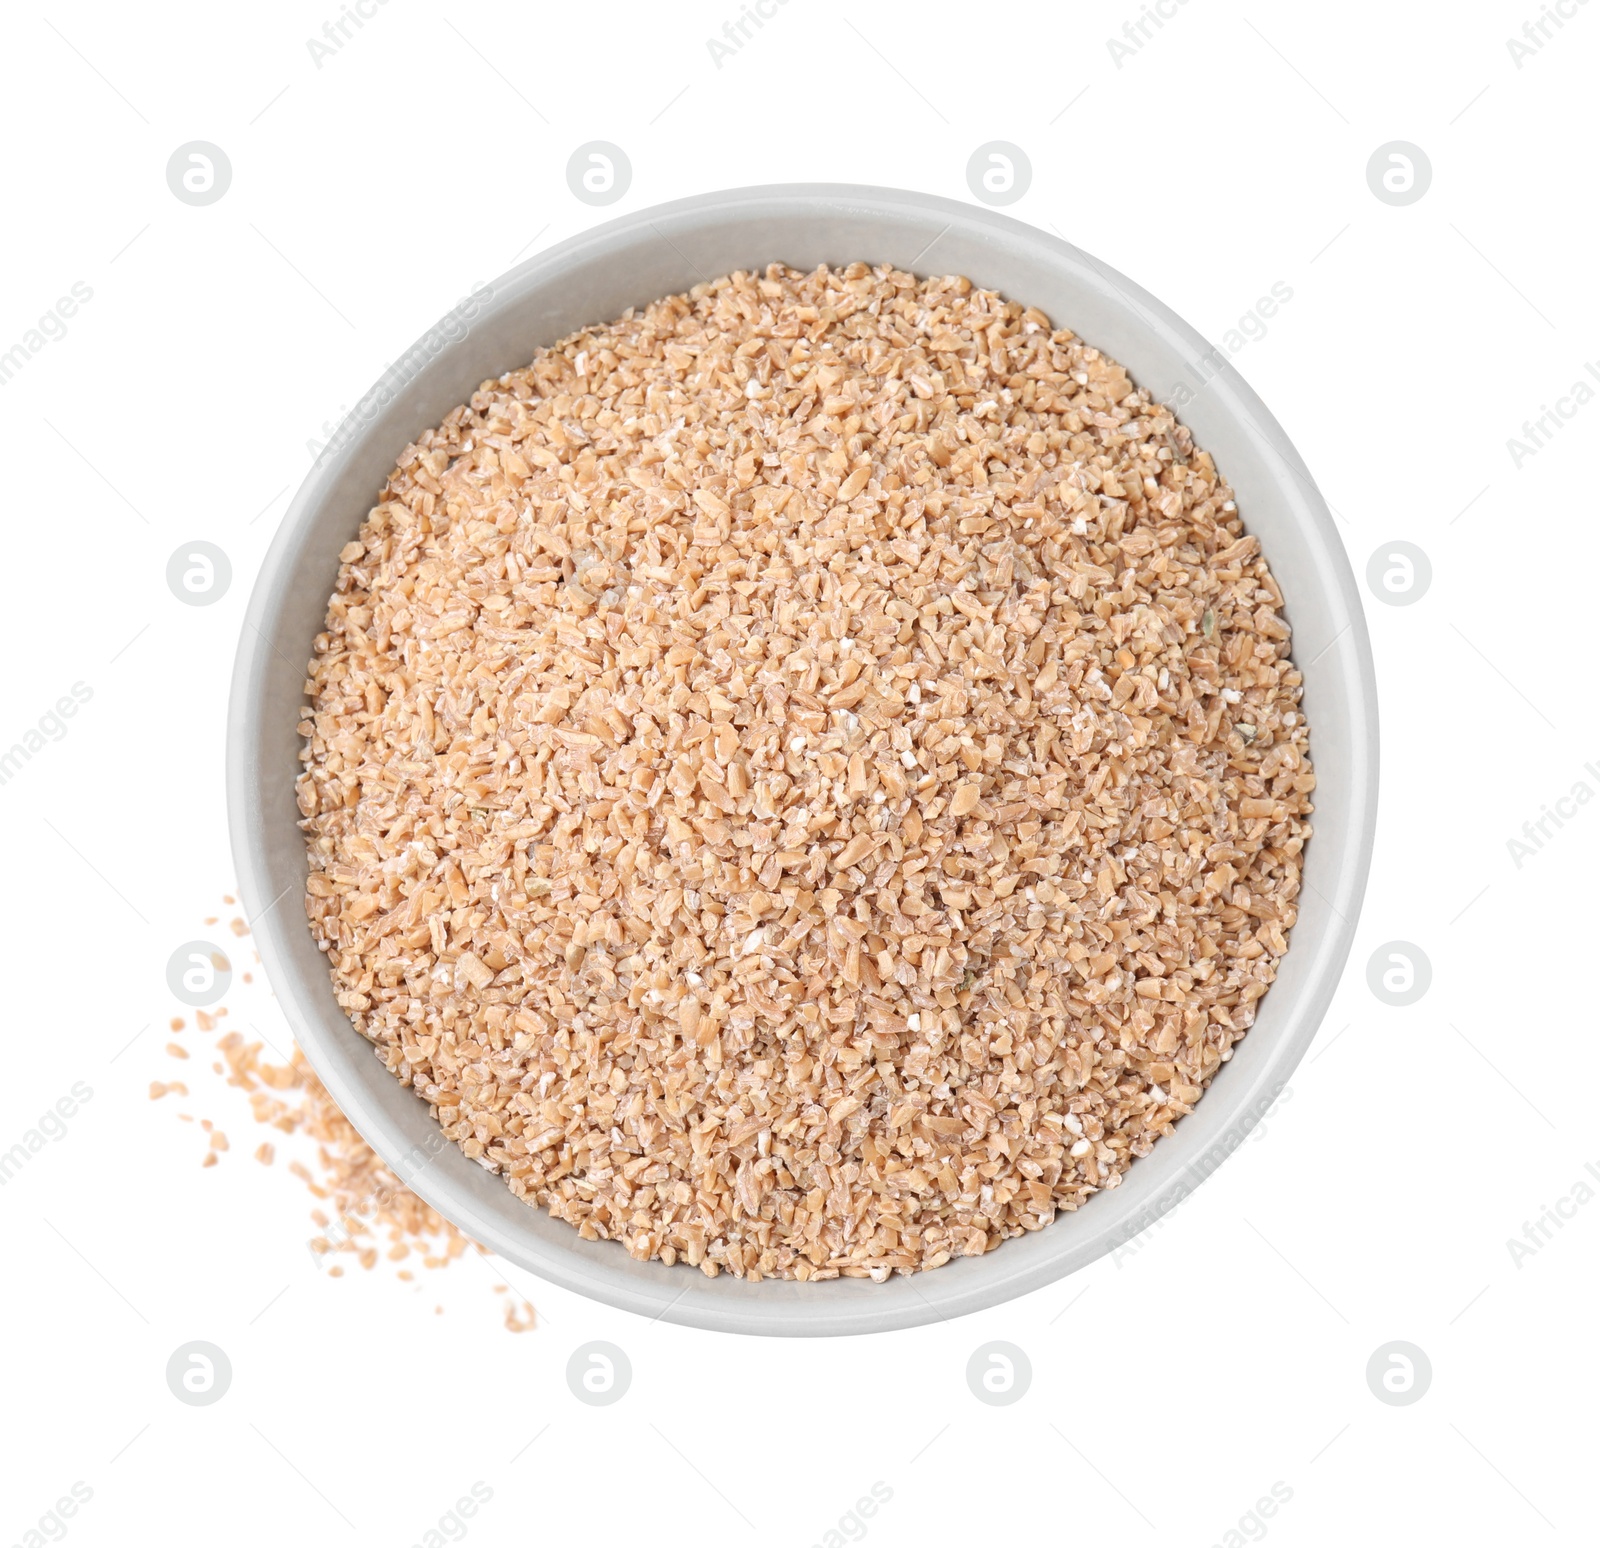 Photo of Dry wheat groats in bowl isolated on white, top view